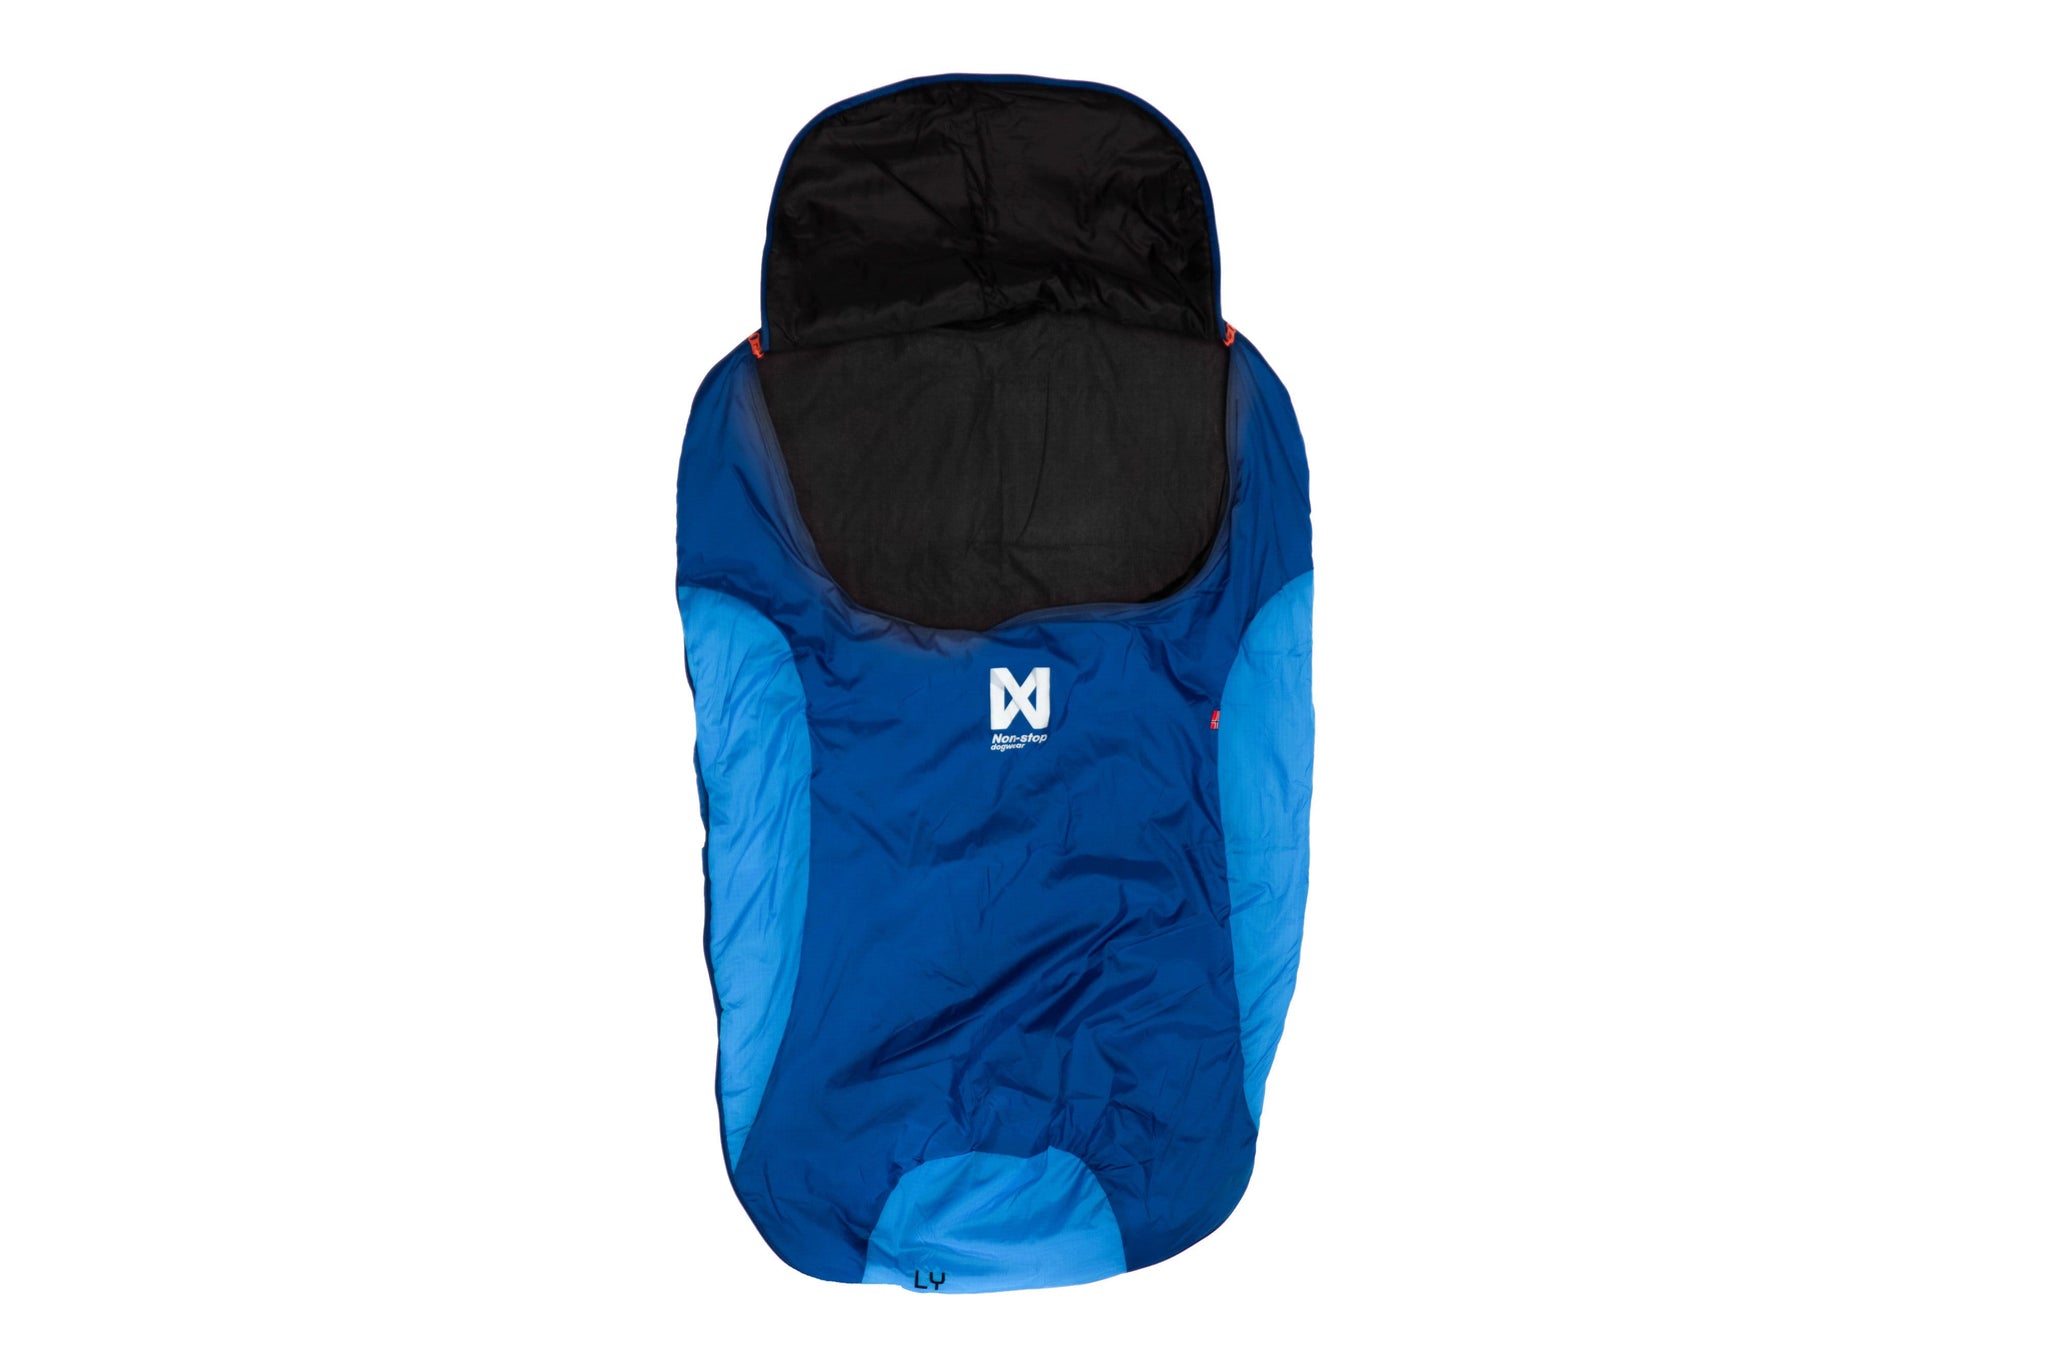 Zipped area of the Ly Sleeping Bag in the open position